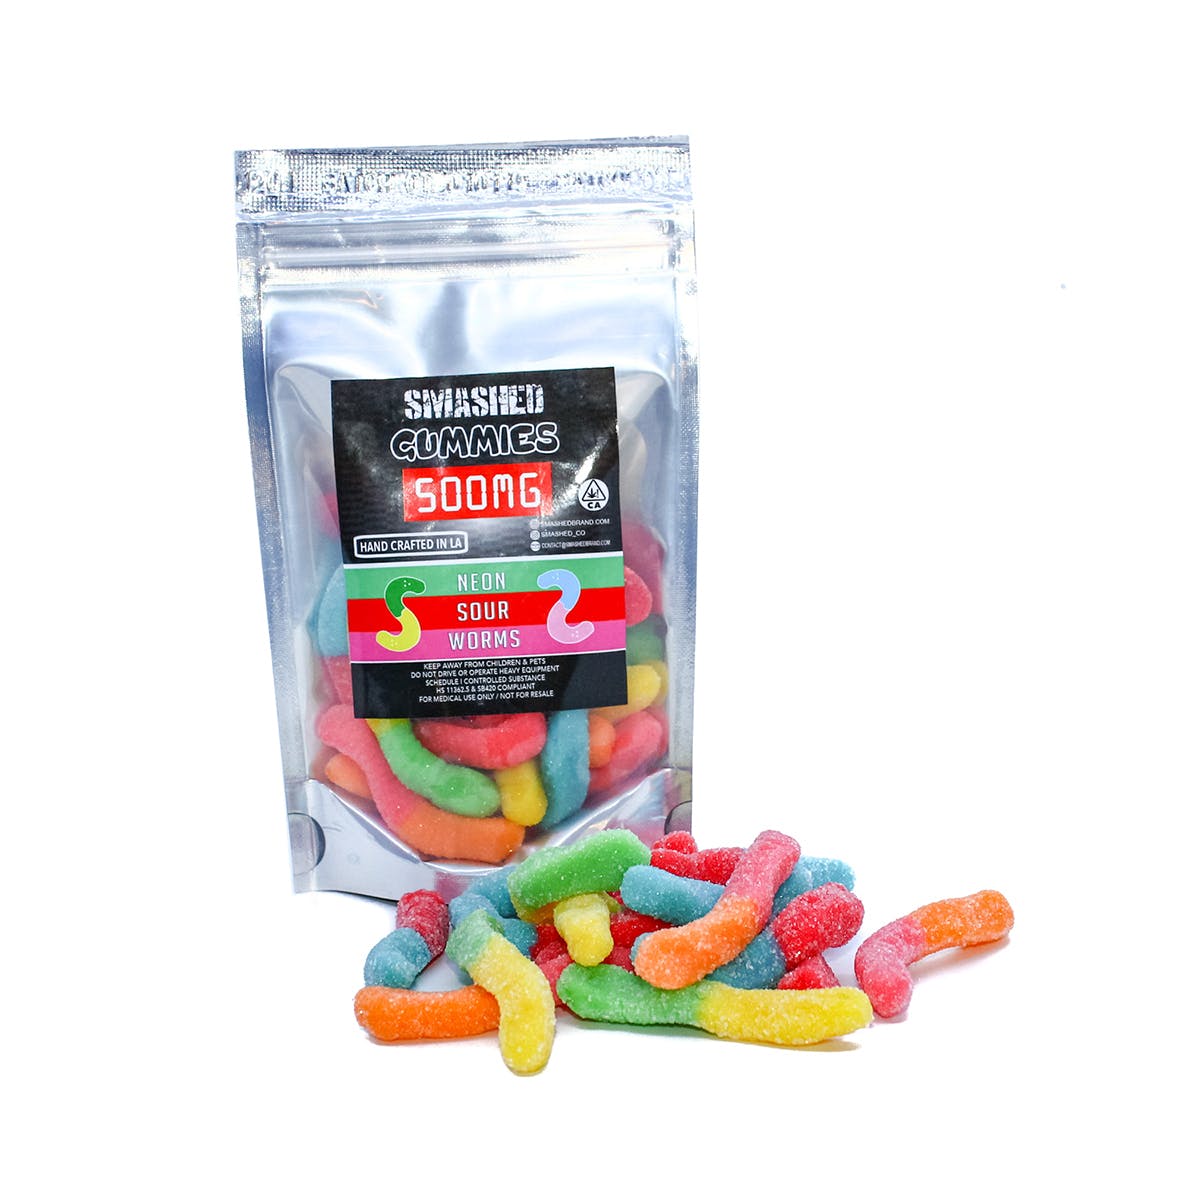 Neon Sour Worms 500mg